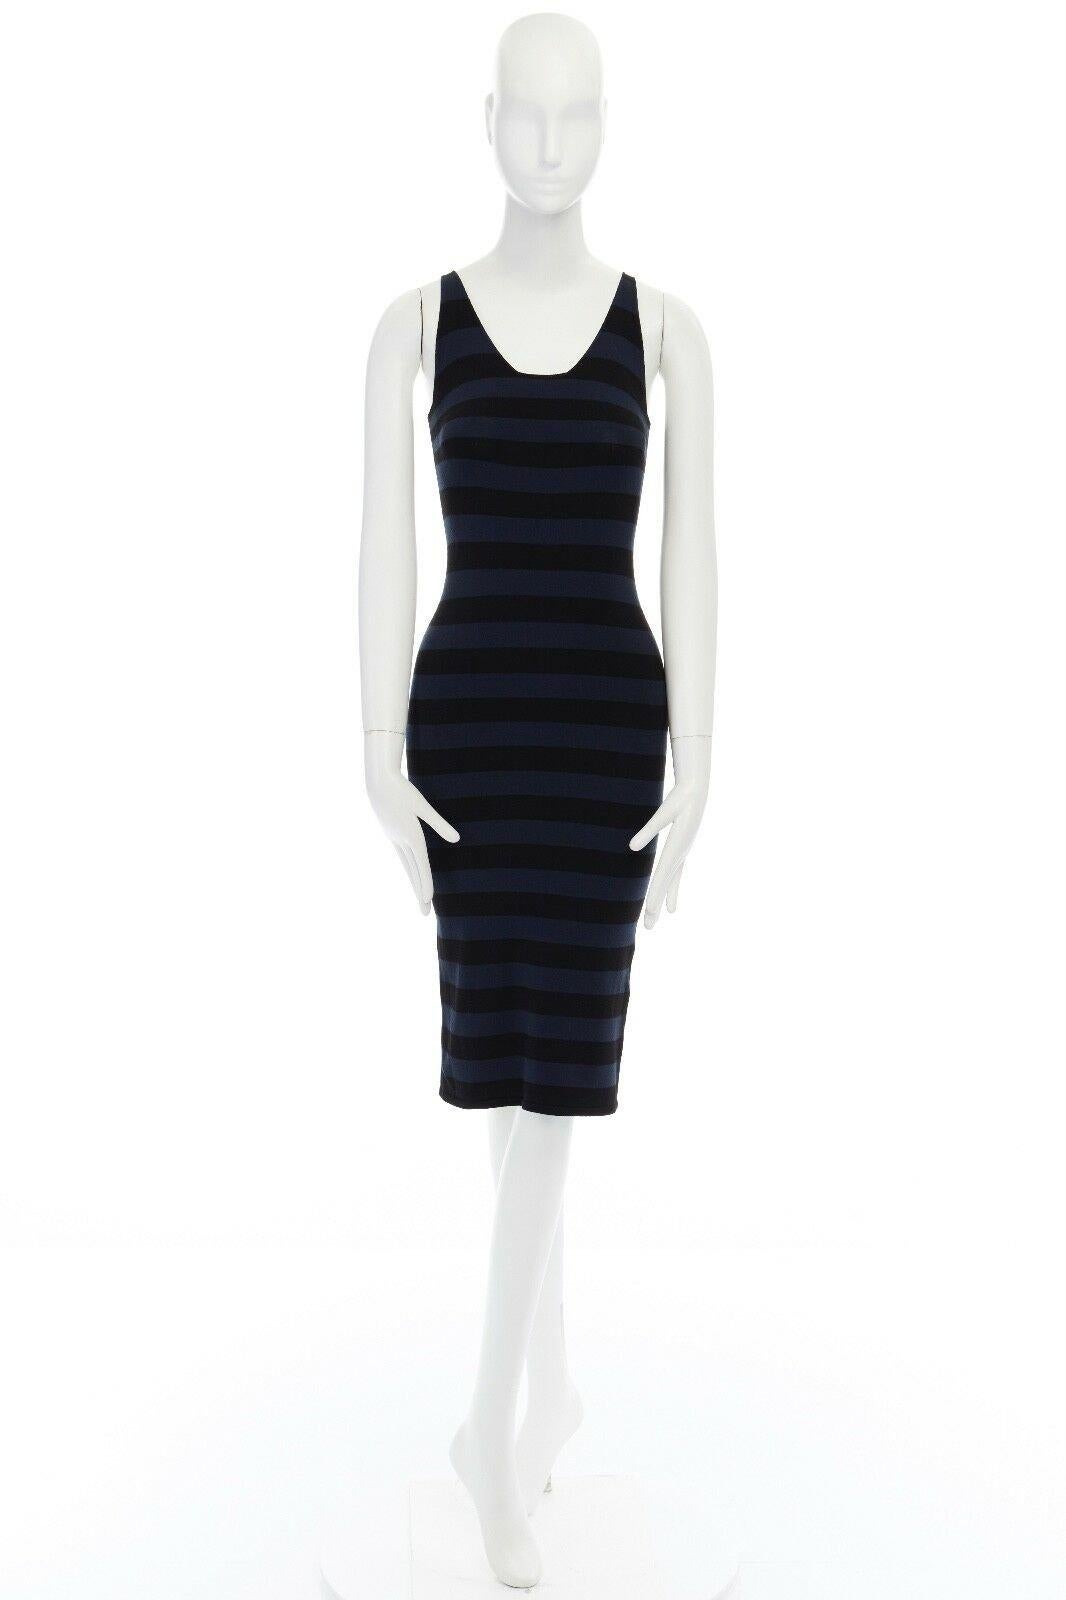 TOMAS MAIER blue black stripe raw cut edge sleeveless stretch casual dress US2 S 
Reference: LNKO/A00871 
Brand: Tomas Maier 
Material: Viscose 
Color: Black 
Pattern: Striped 
Extra Detail: Viscose, polyester. Black and navy blue. Raw cut neckline